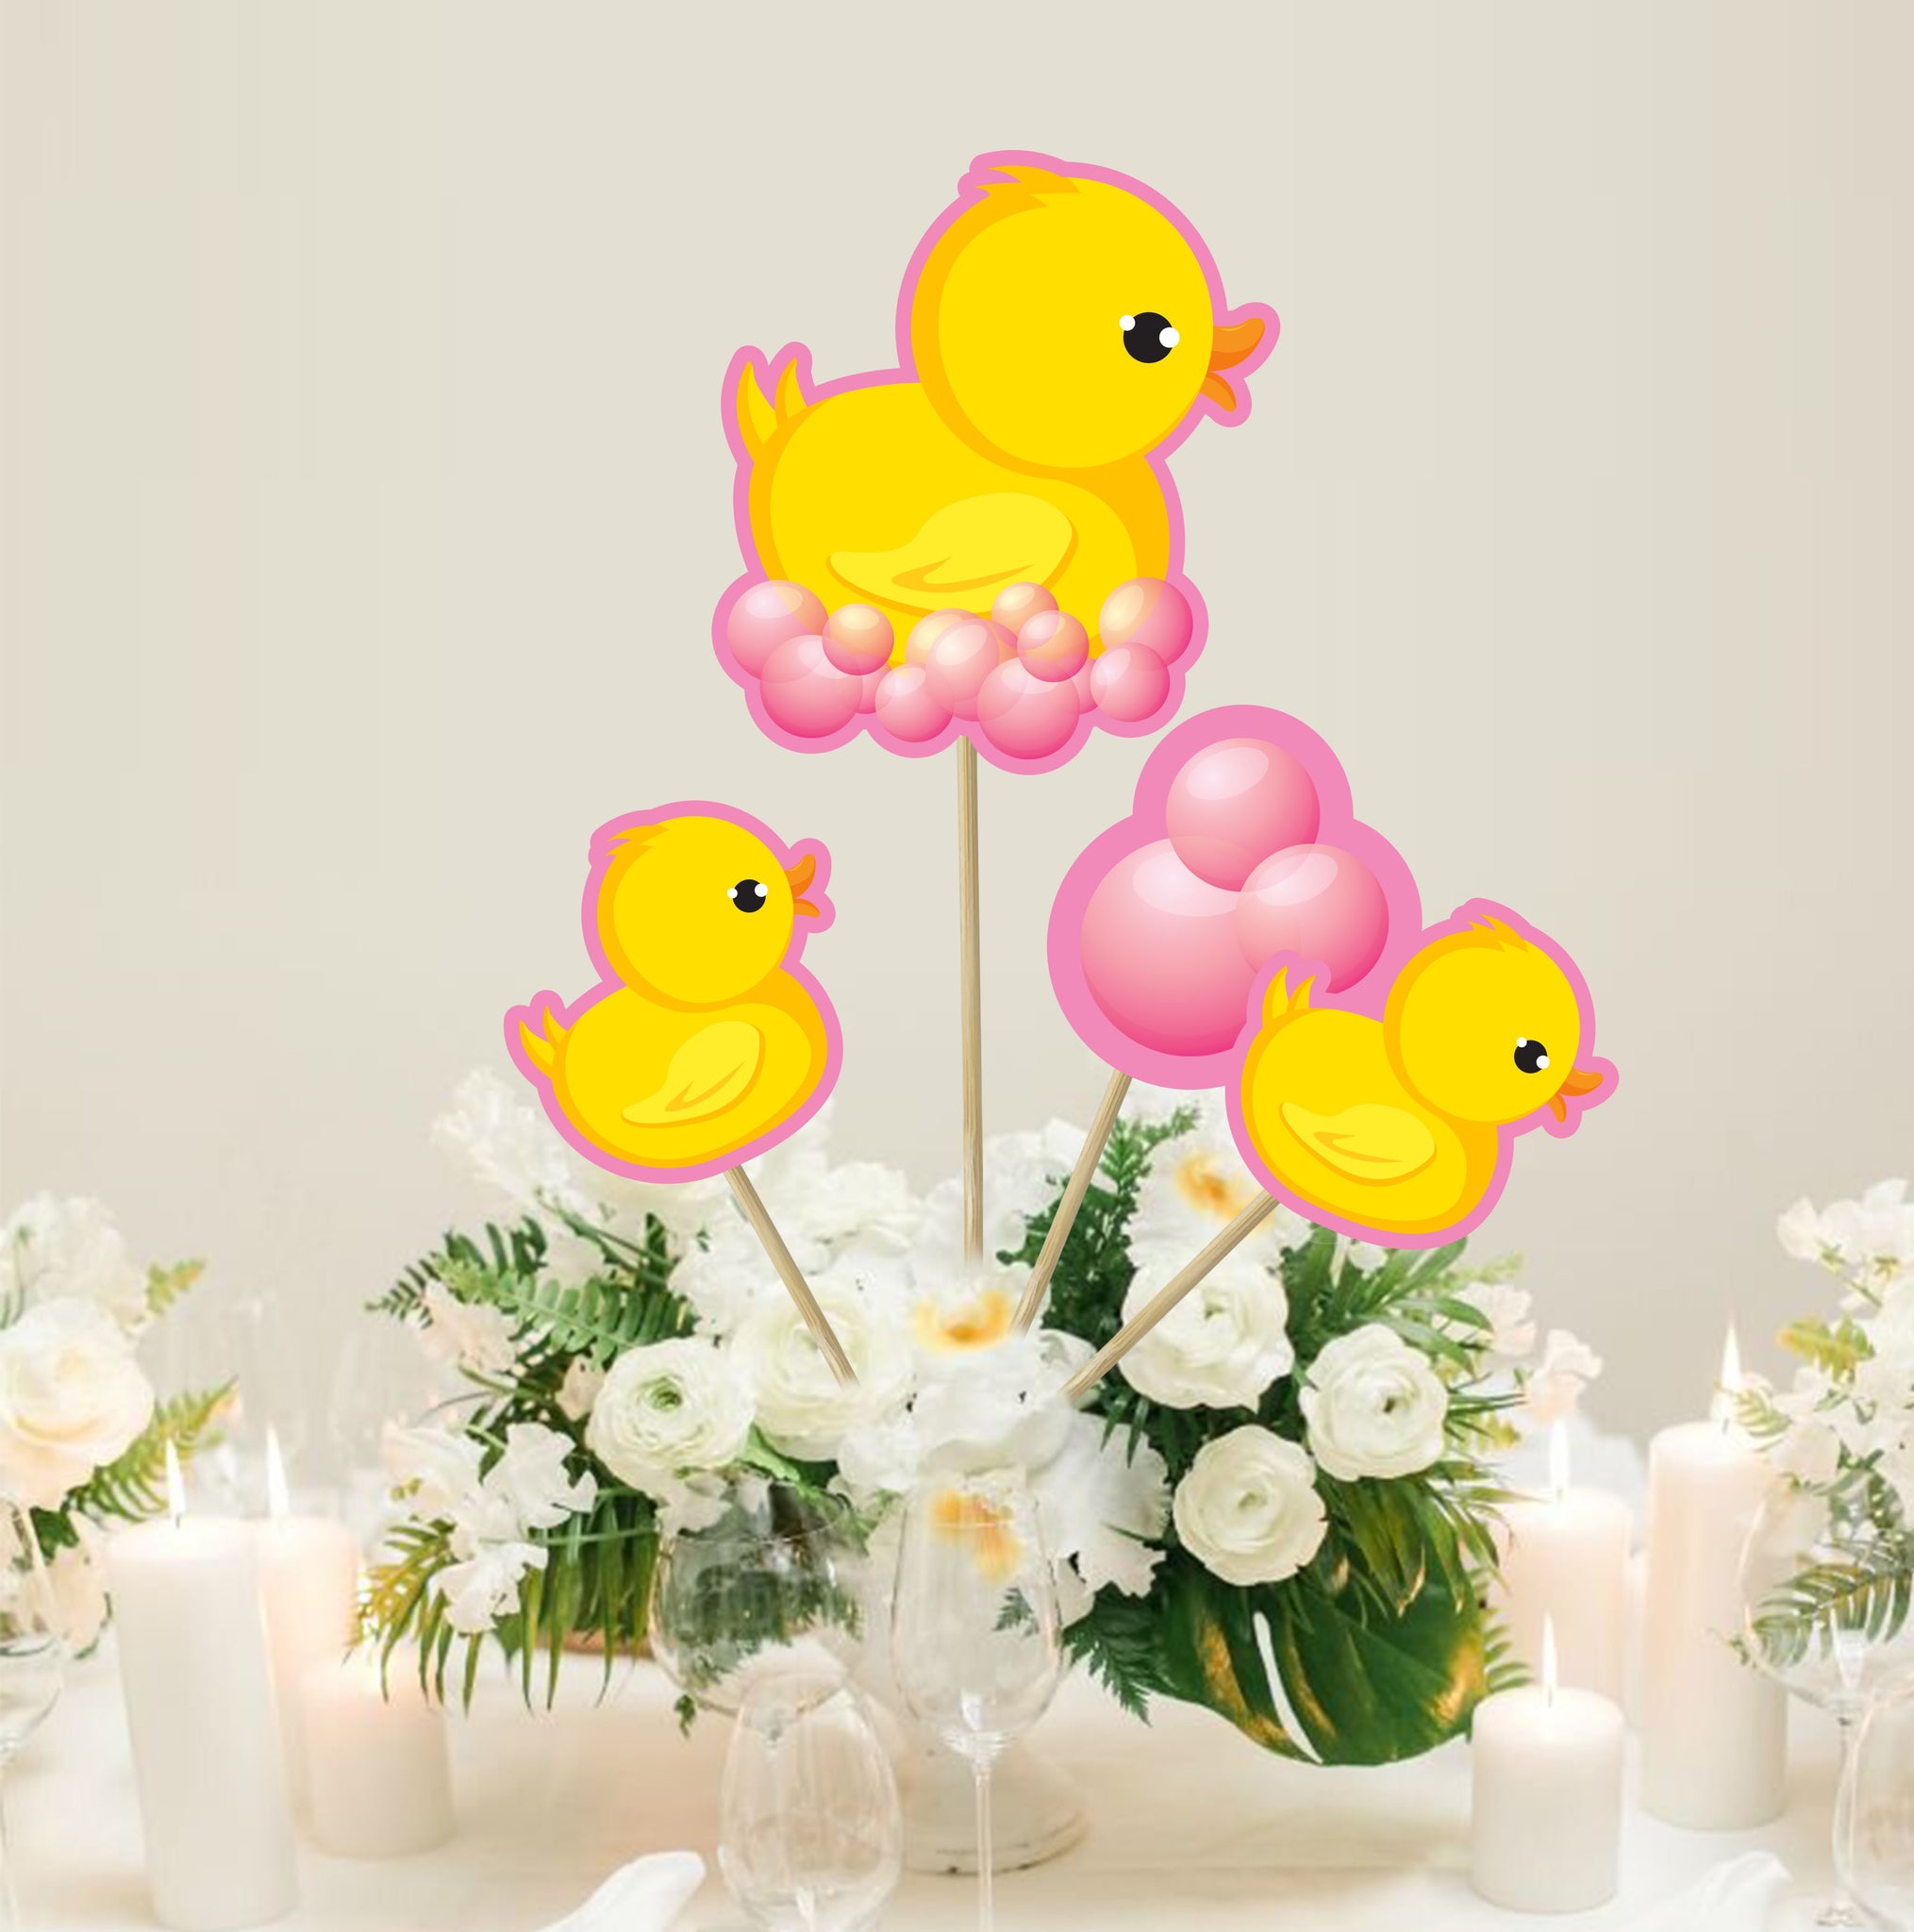 Baby Shower Party Supplies & Decorations